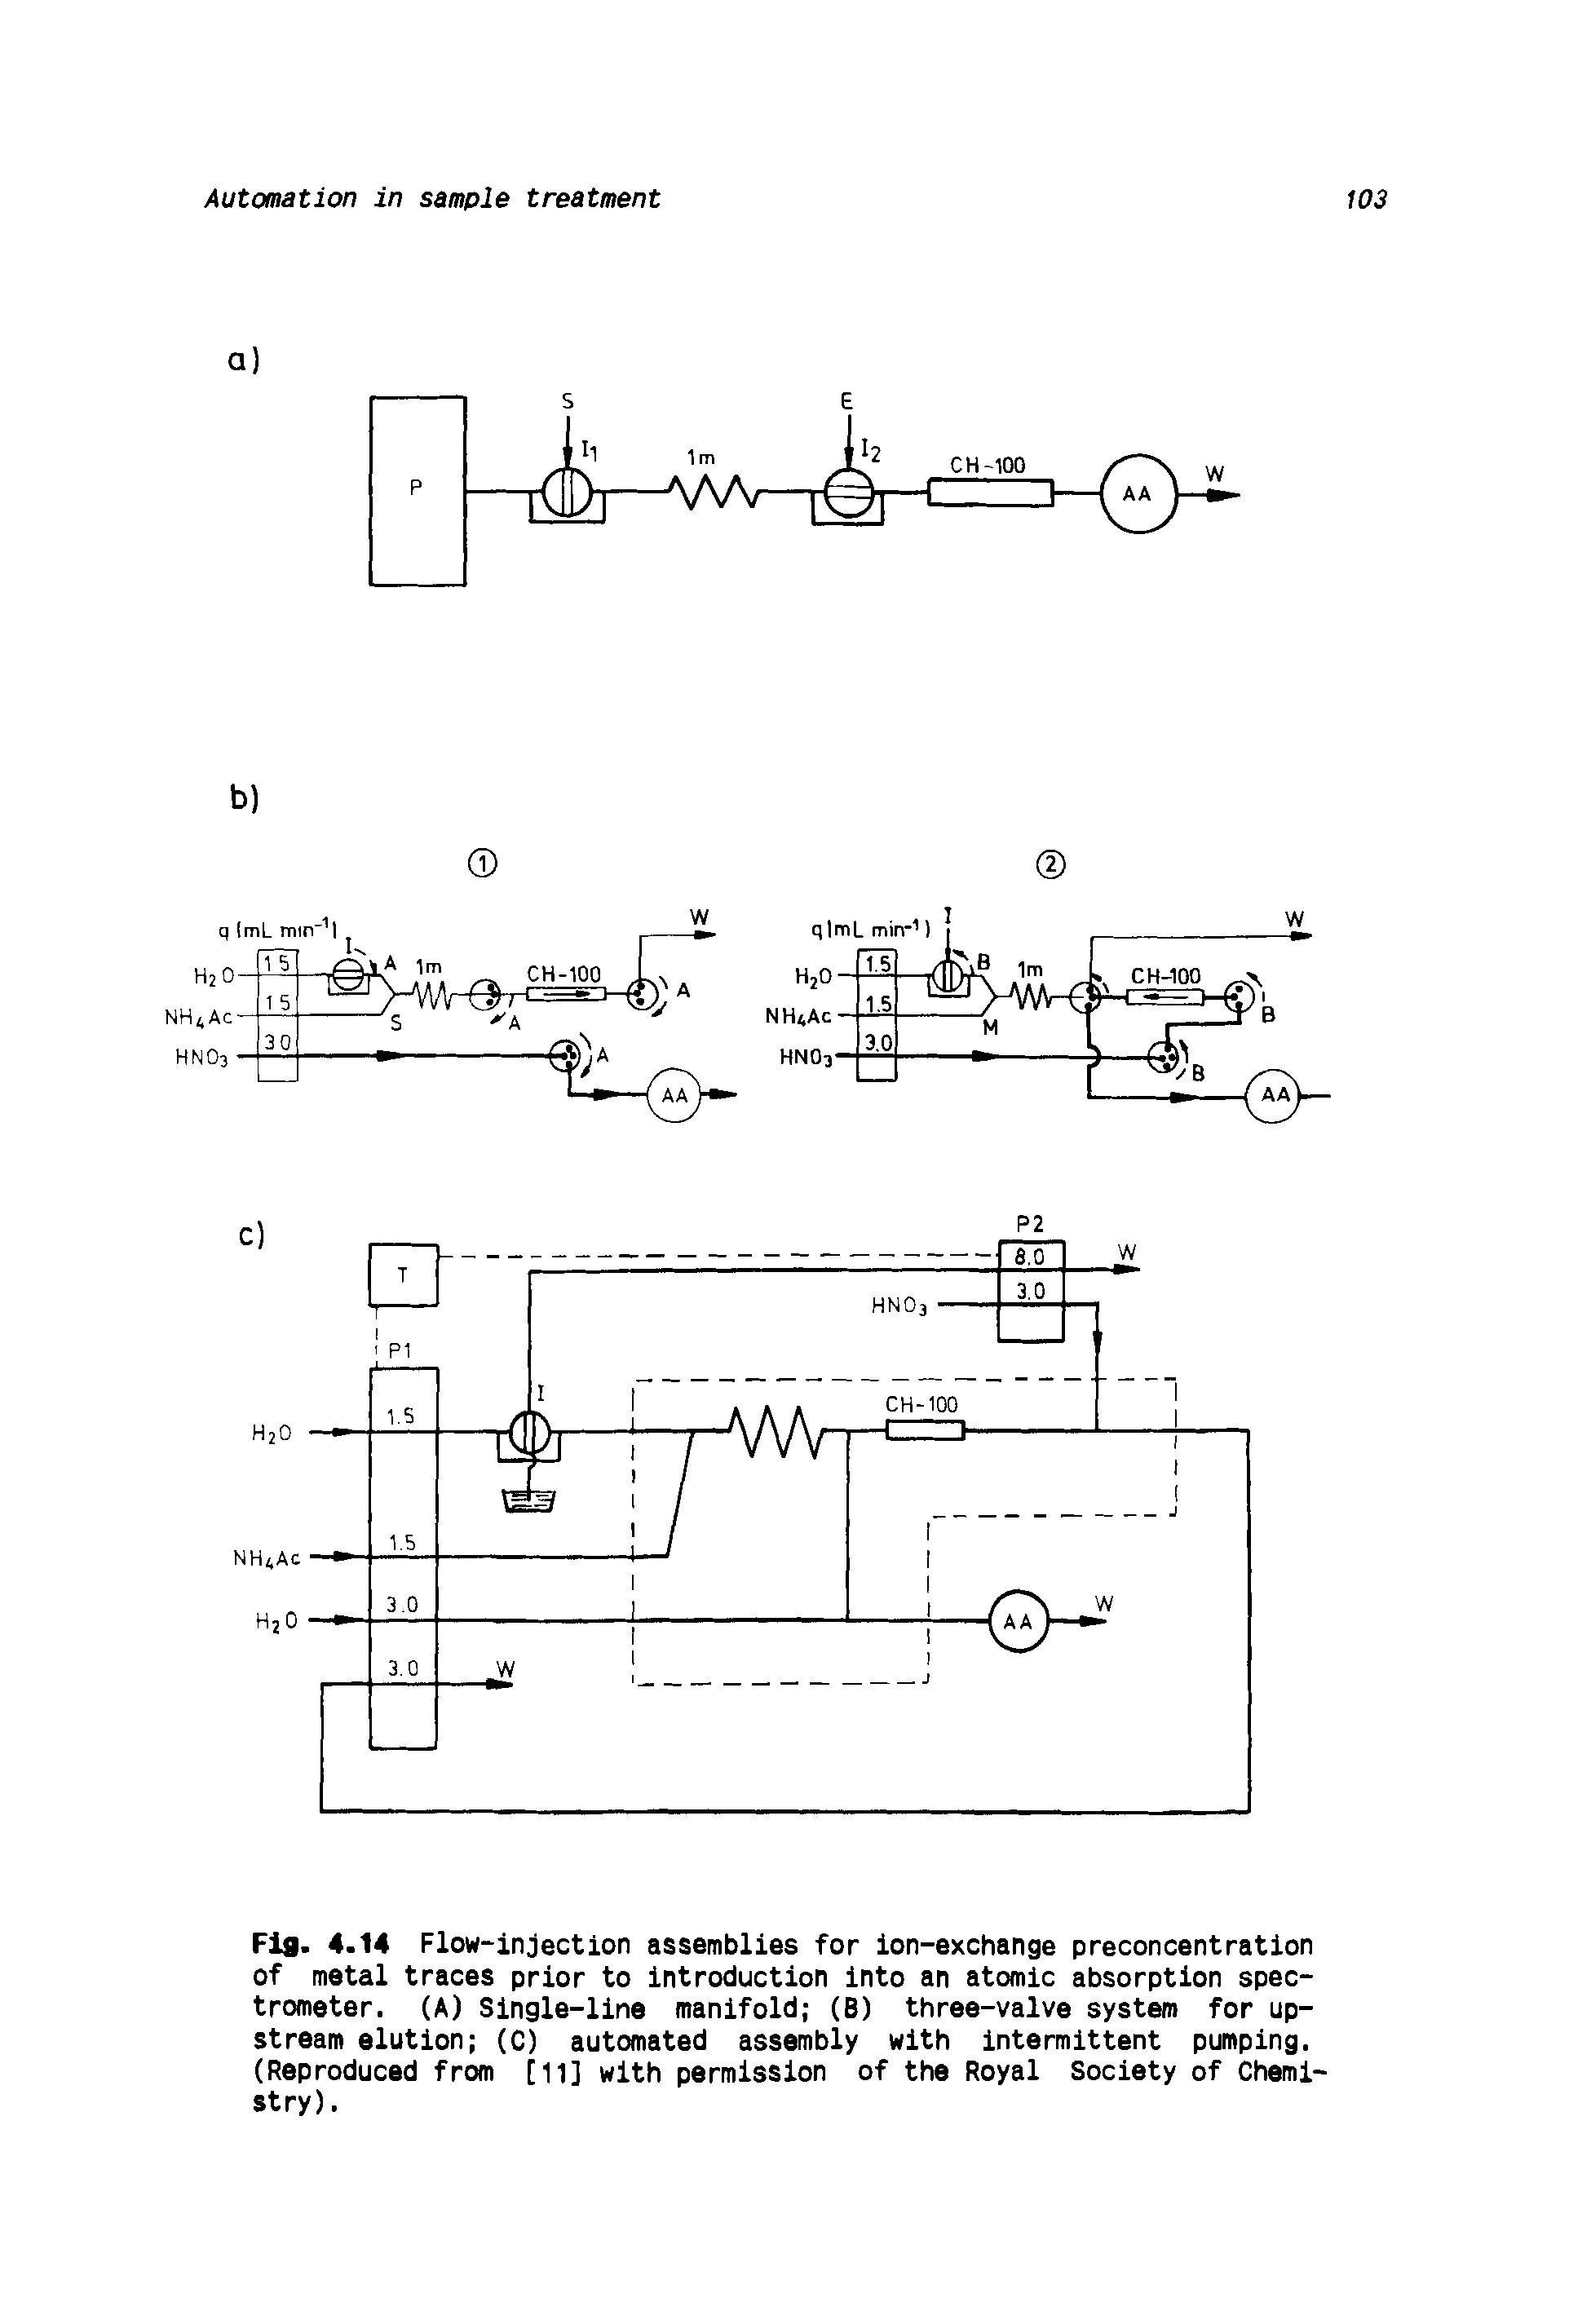 Fig. 4.14 Flow-injection assemblies for ion-exchange preconcentration of metal traces prior to introduction into an atomic absorption spectrometer. (A) Single-line manifold (B) three-valve system for upstream elution (C) automated assembly with intermittent pumping. (Reproduced from [11] with permission of the Royal Society of Chemistry).